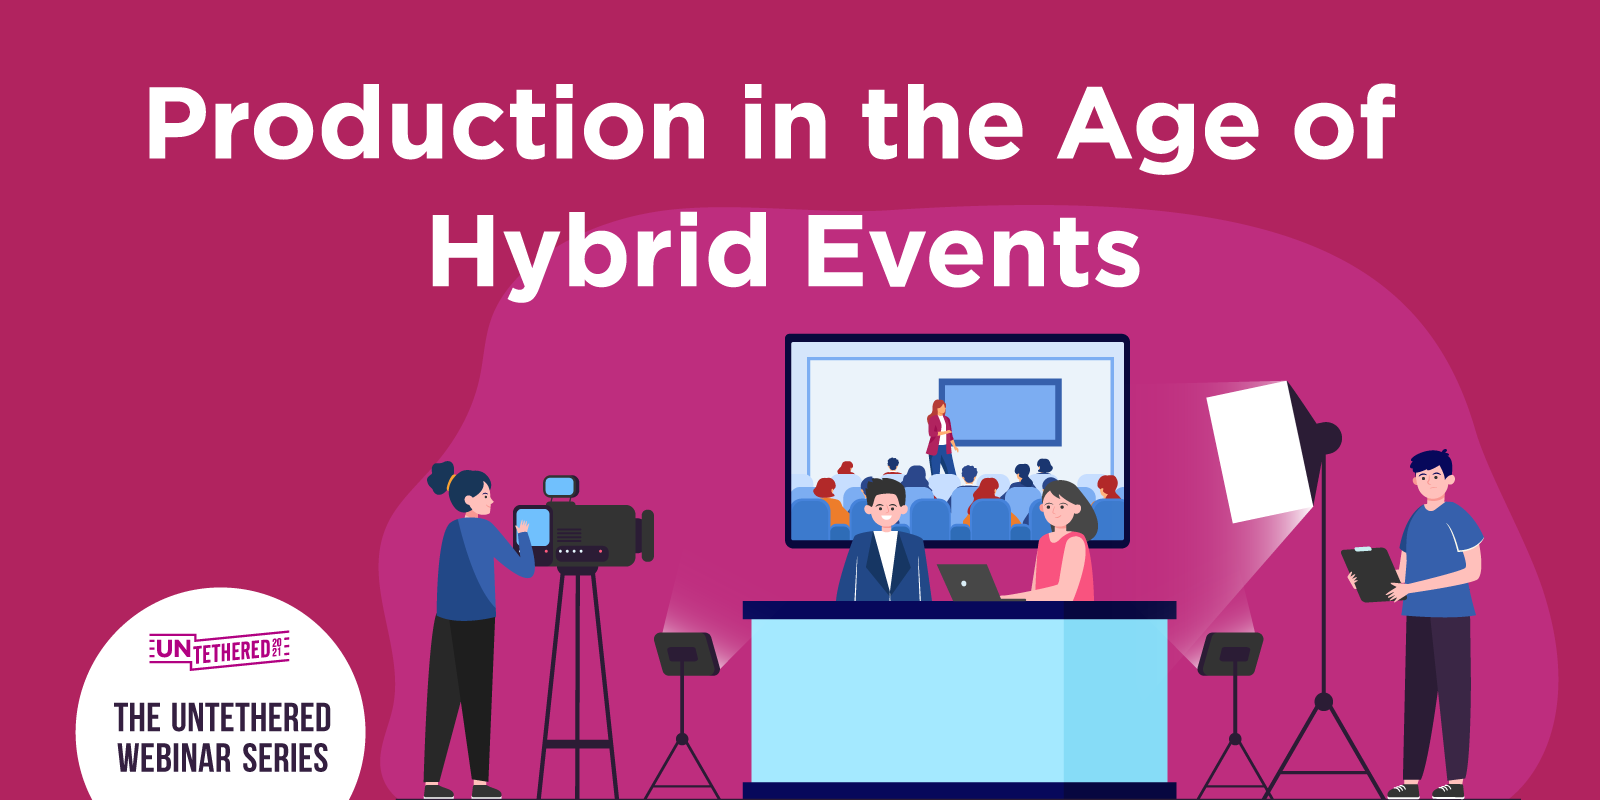 Production in the Age of Hybrid Events Webinar graphic with illustration of a production team doing a live broadcast.